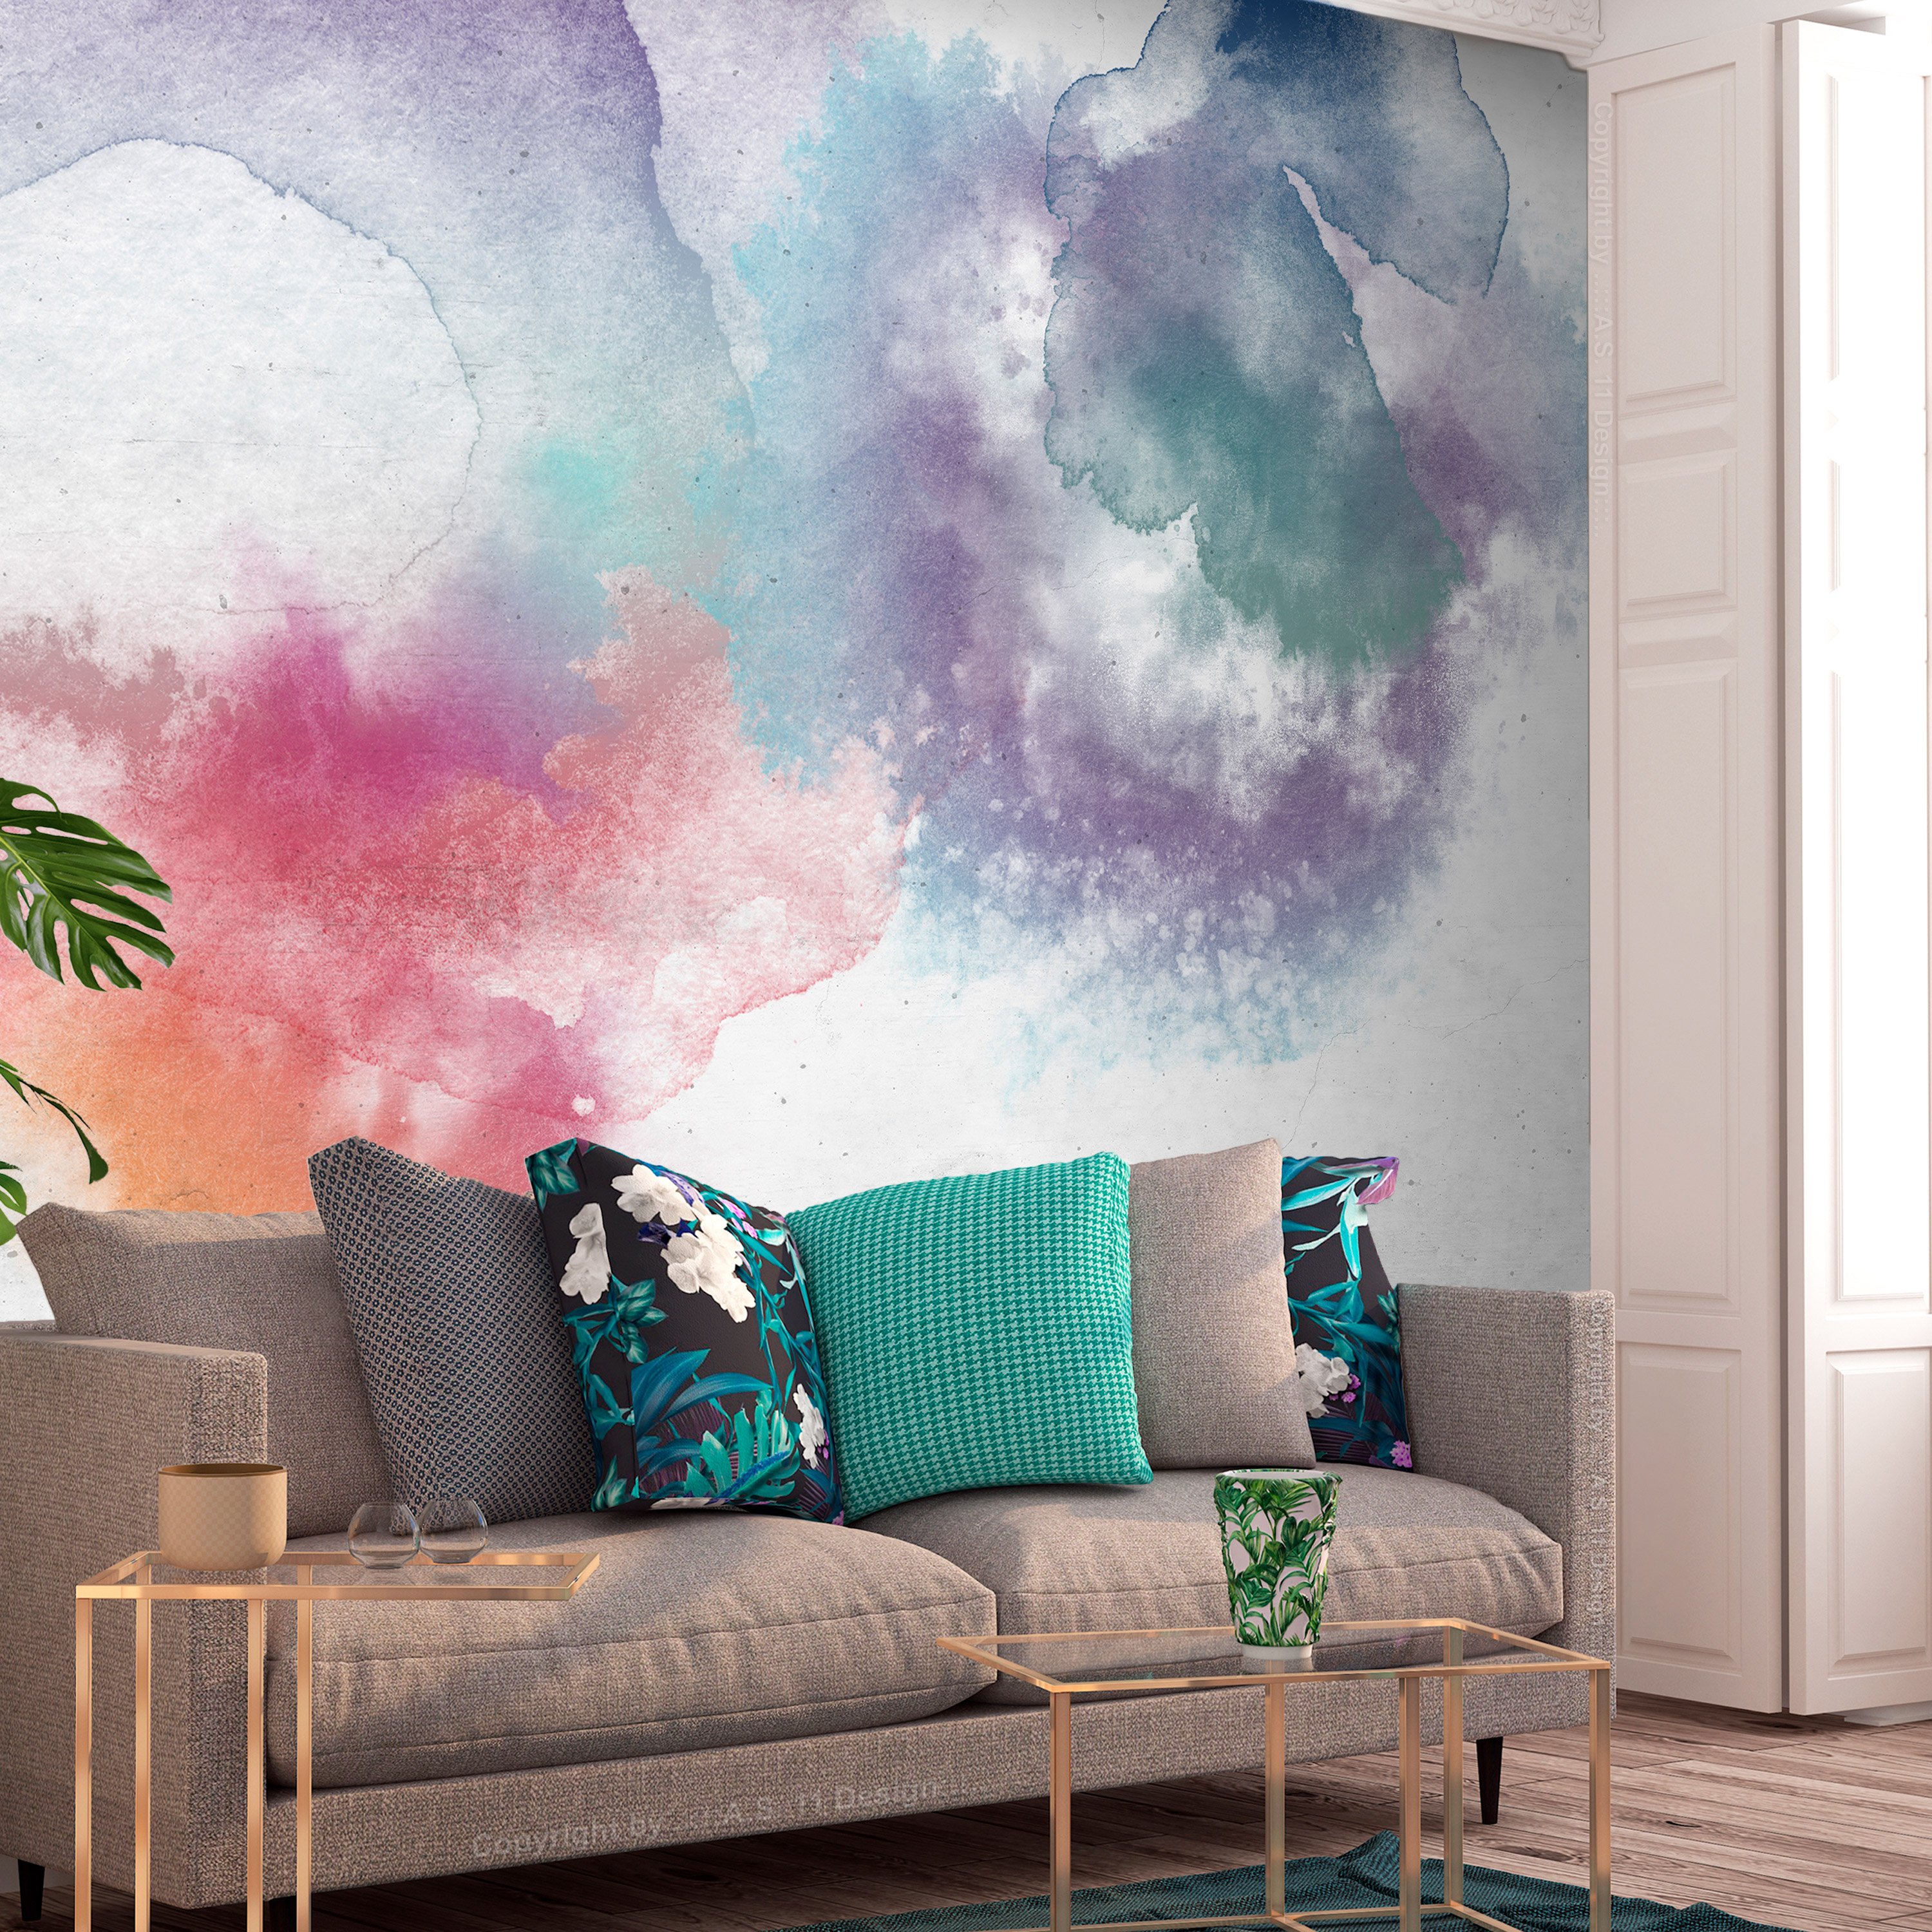 Self-adhesive Wallpaper - Painted Mirages - First Variant - 147x105